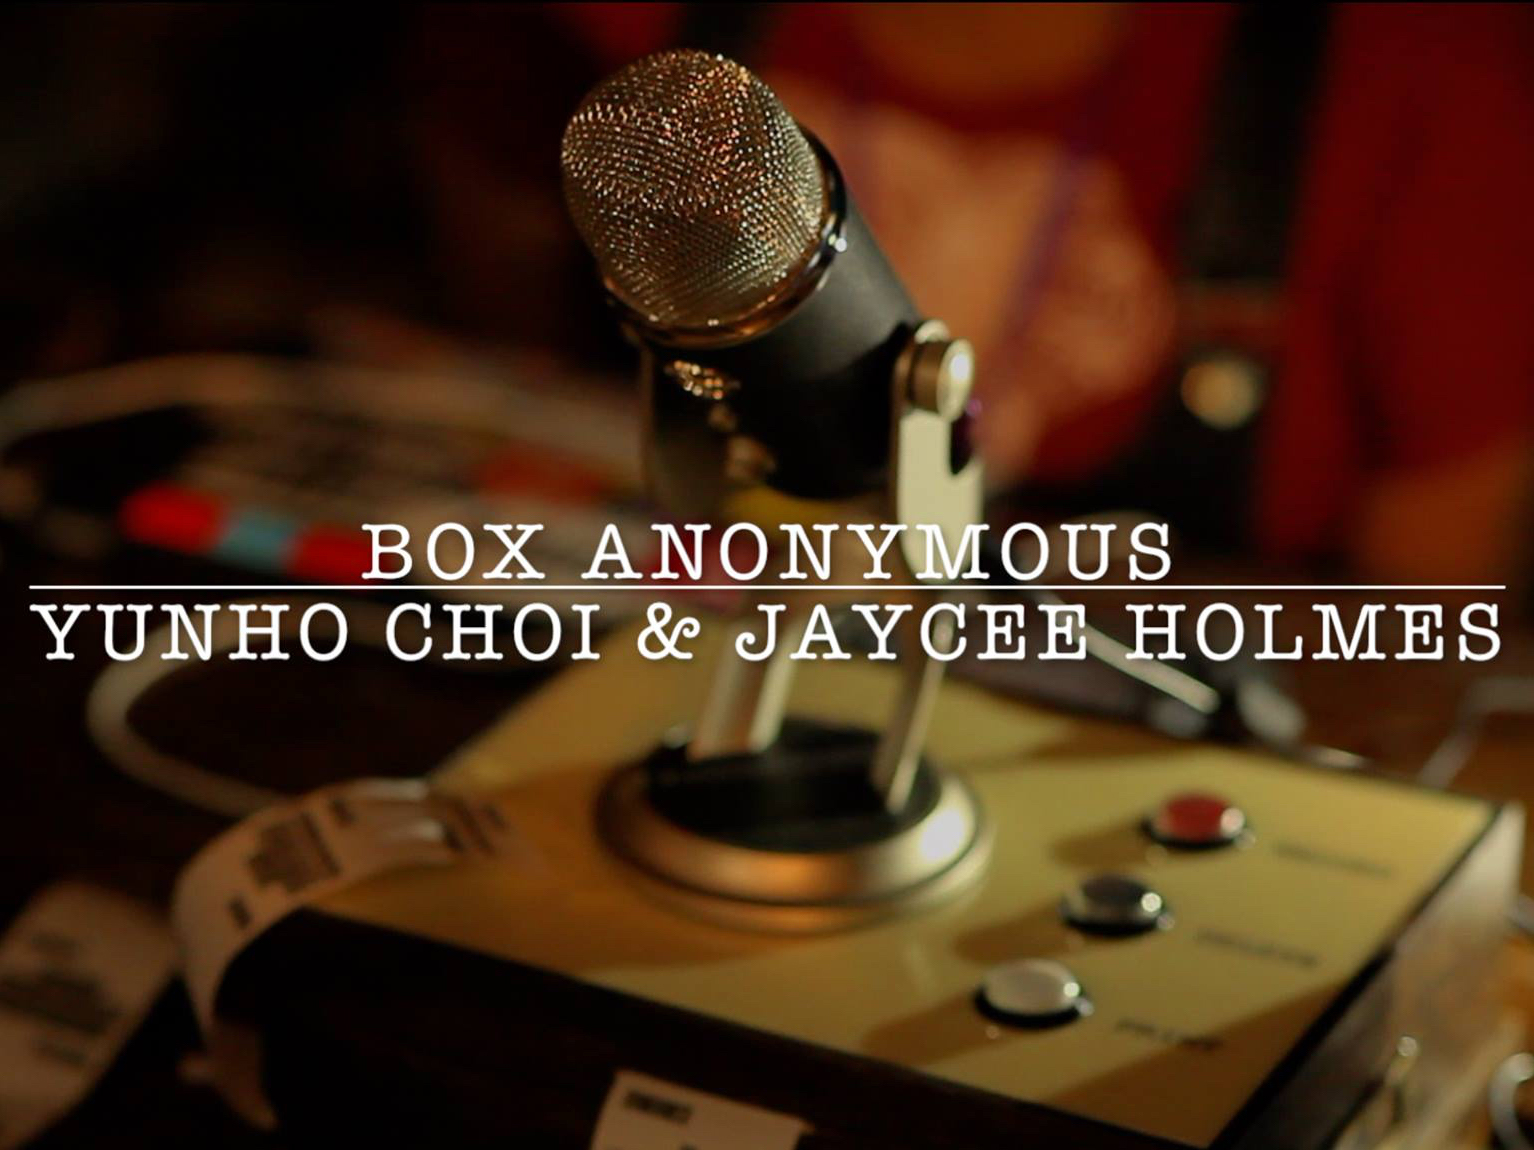 "Tell me a secret. And I will tell you one back." Box Anonymous is an interactive installation which stores someone's secret and gives someone else's secret.